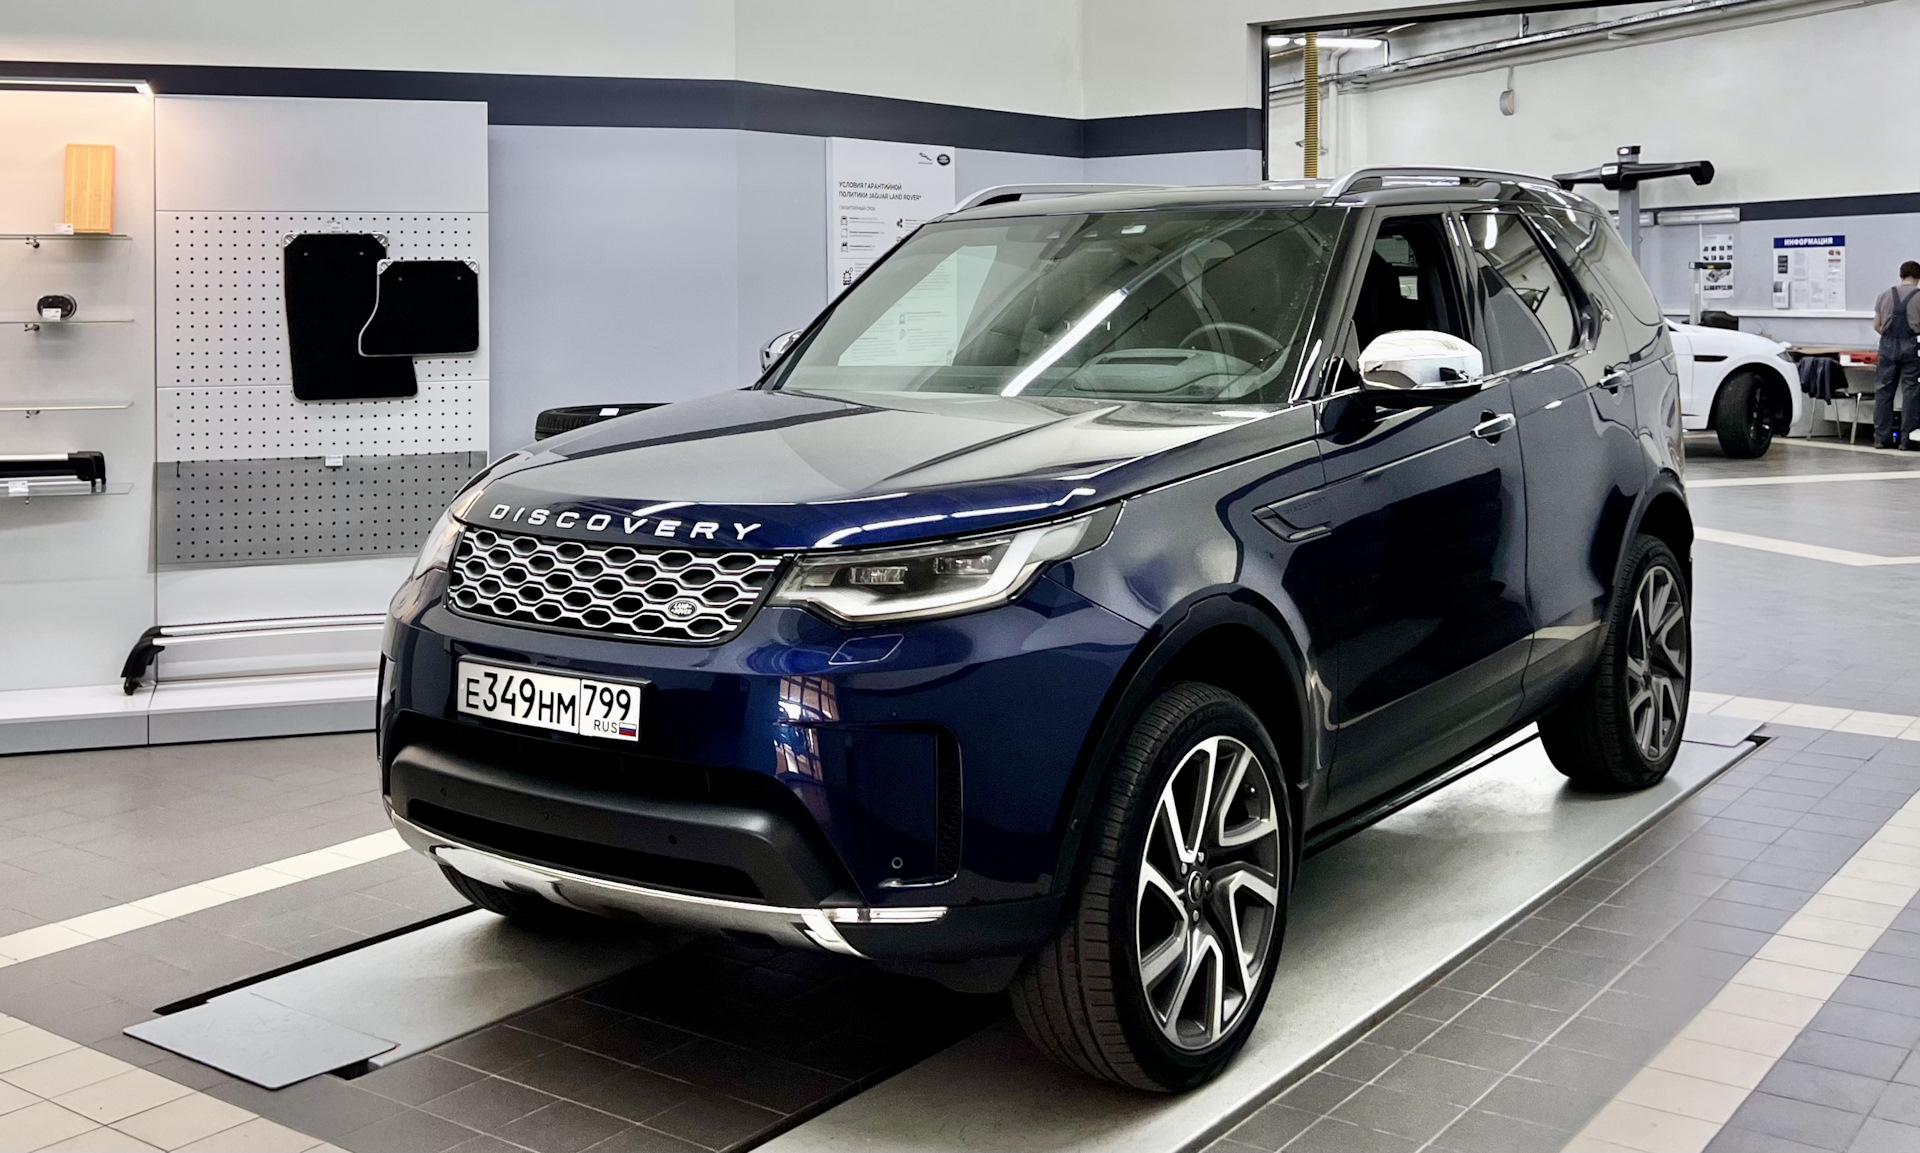 Discovery 5. Дискавери 5 и Дискавери спорт. Land Rover Discovery 5 2.0 синего. Дискавери 5 лифт. Дискавери 16